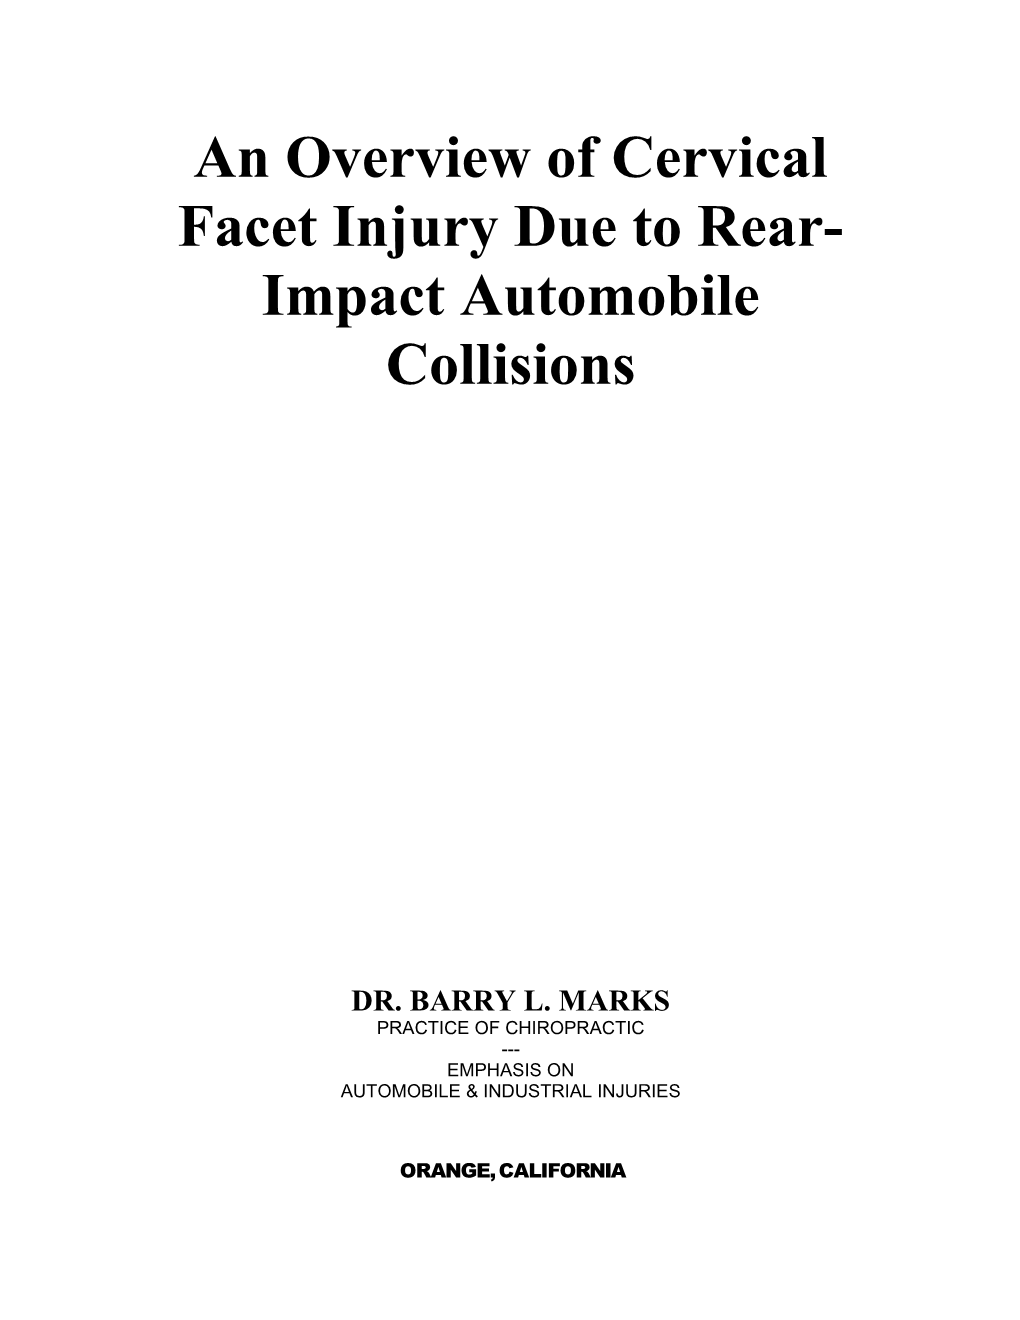 An Overview of Cervical Facet Injury Due to Rear-Impact Automobile Collisions